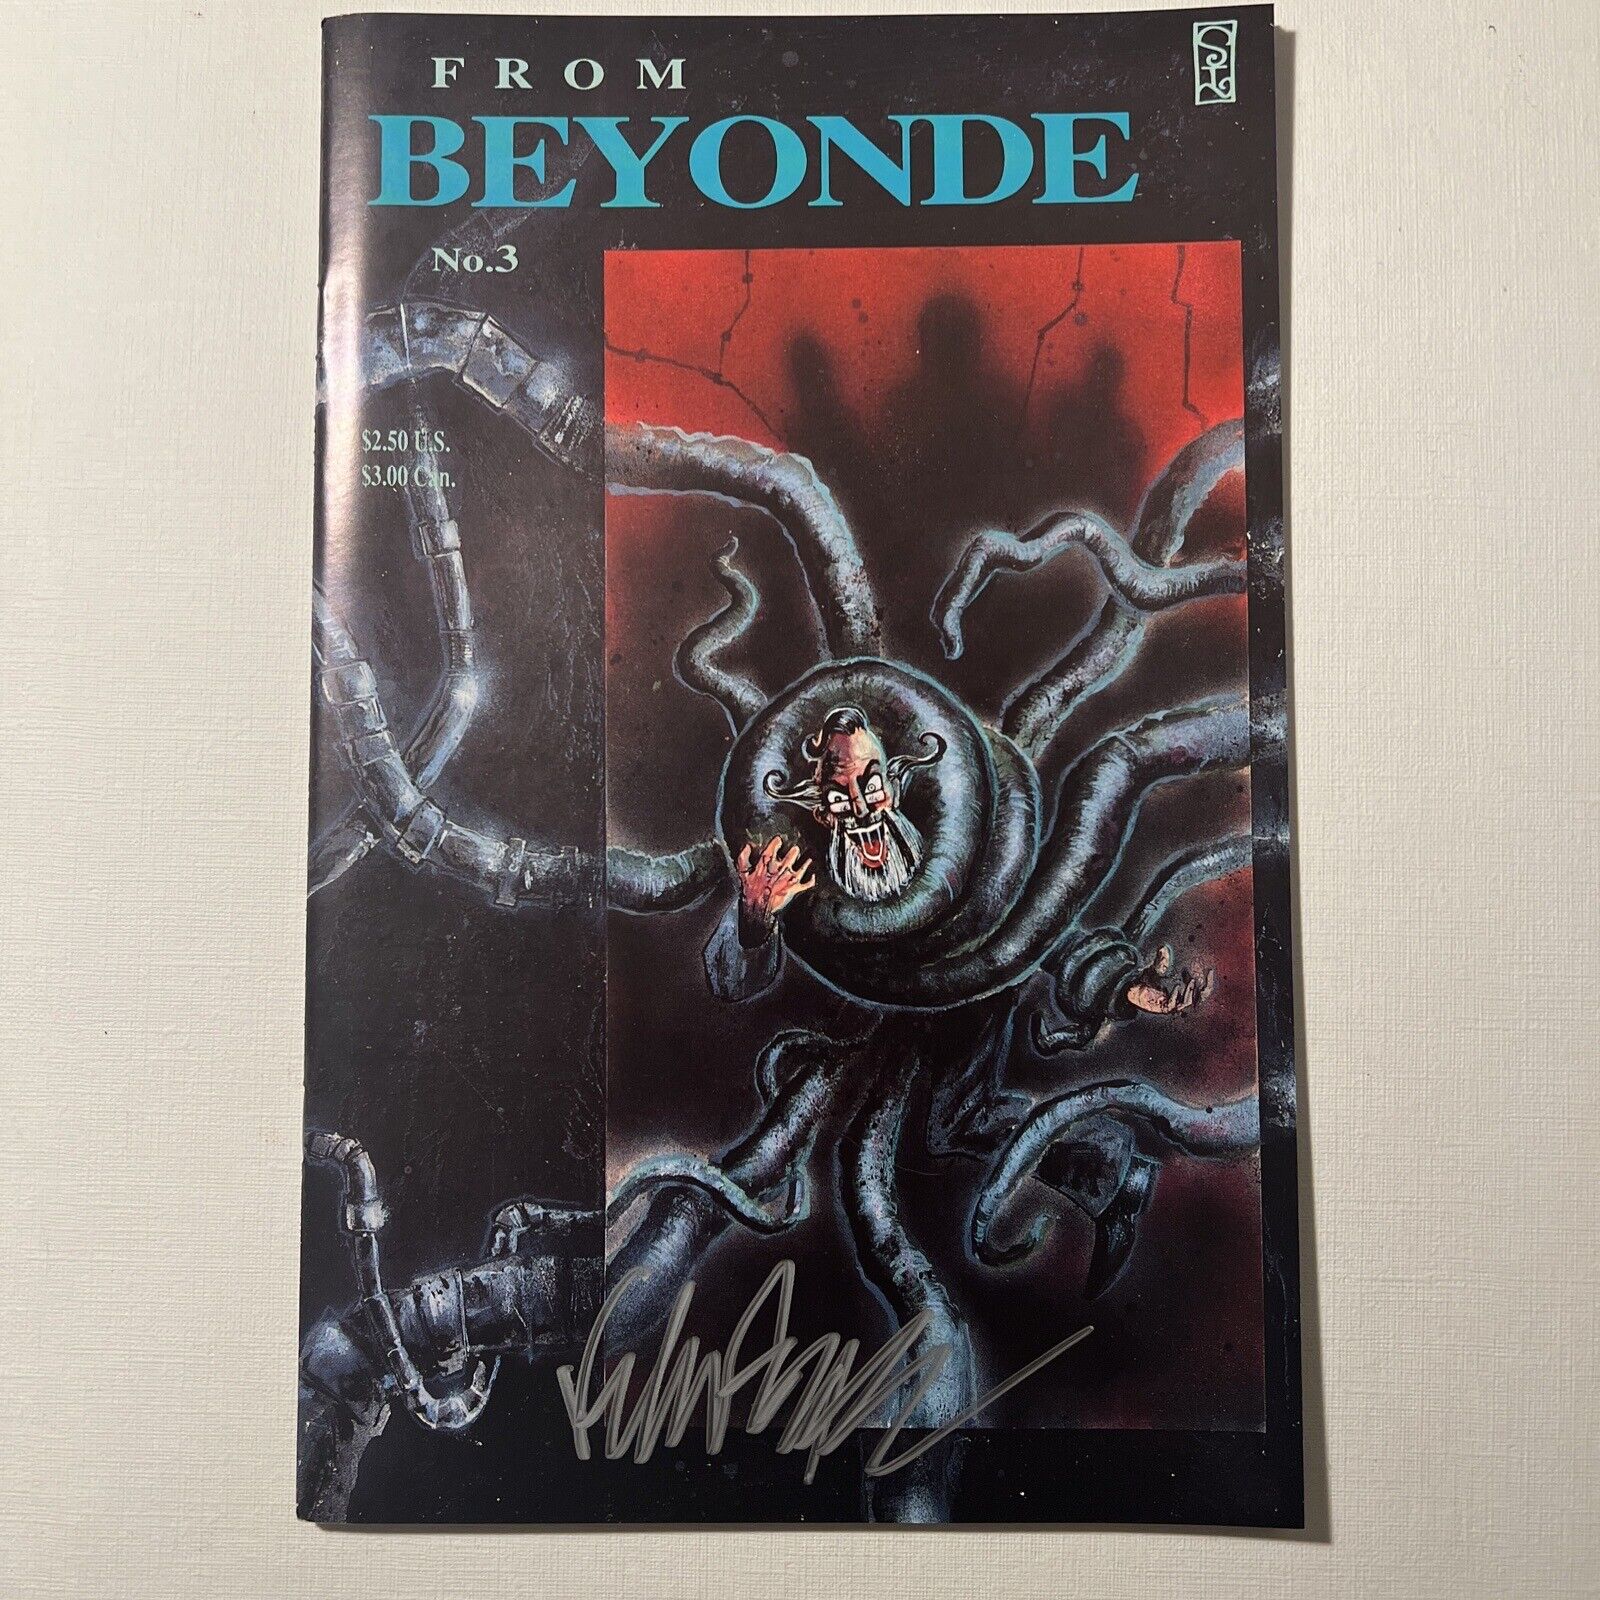 From Beyonde #3 1st Studio Insidio NM/M Signed By Frank Forte Early Al Columbia